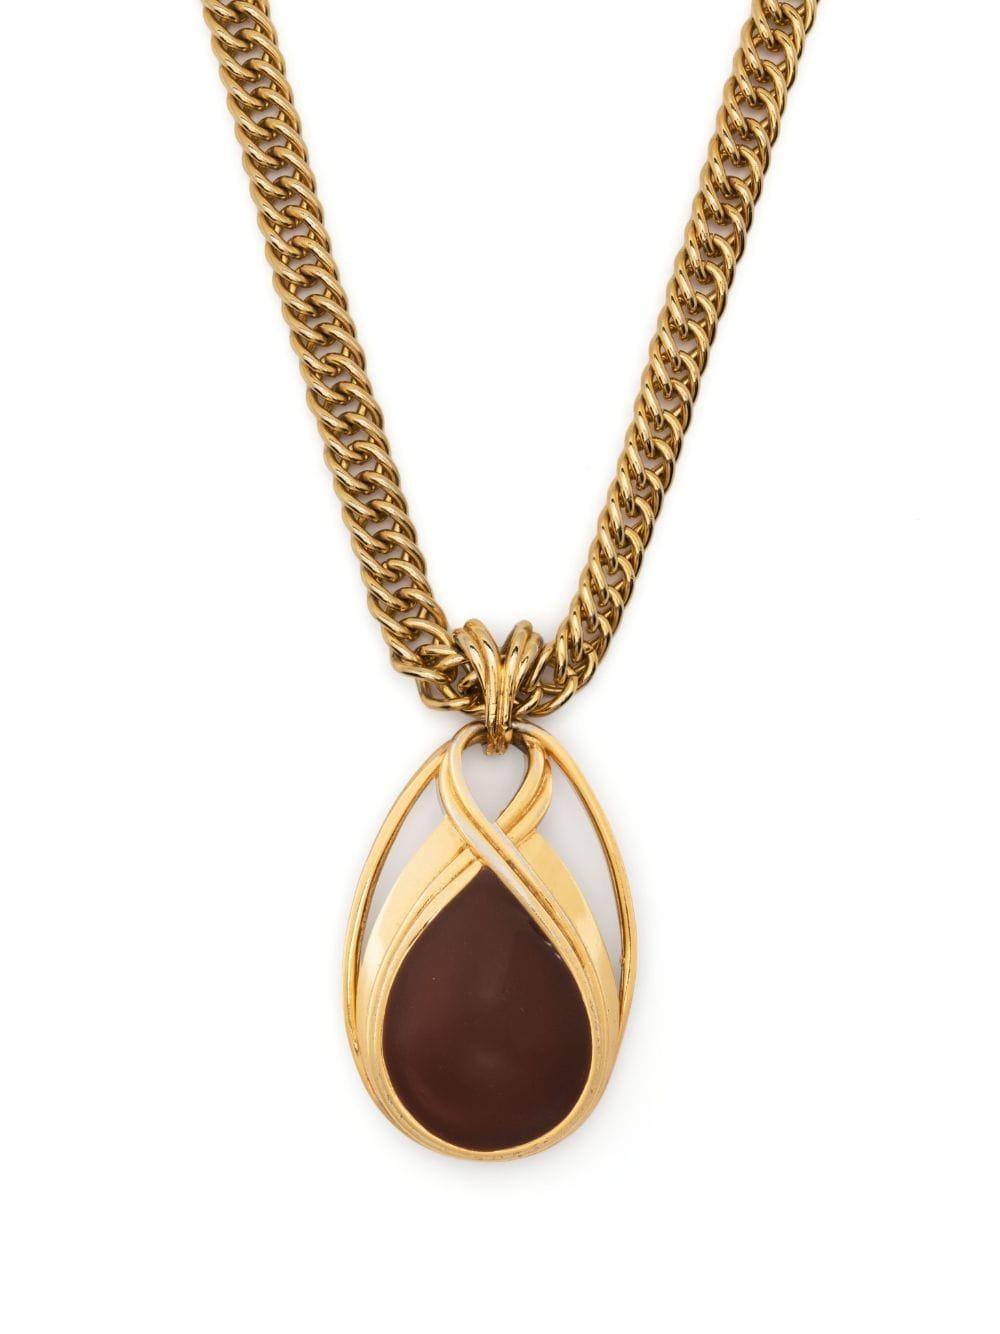 Lanvin Cabochon Pendant Necklace featuring a bordeaux cabochon gemstone pendant in a gold-tone setting and a nice gold-tone fancy chain, spring-ring fastening. 
Circa: 1970s
Length when open: 18.11 in (46 cm)
Pendant length: 1.9 in (5 cm)
Pendant